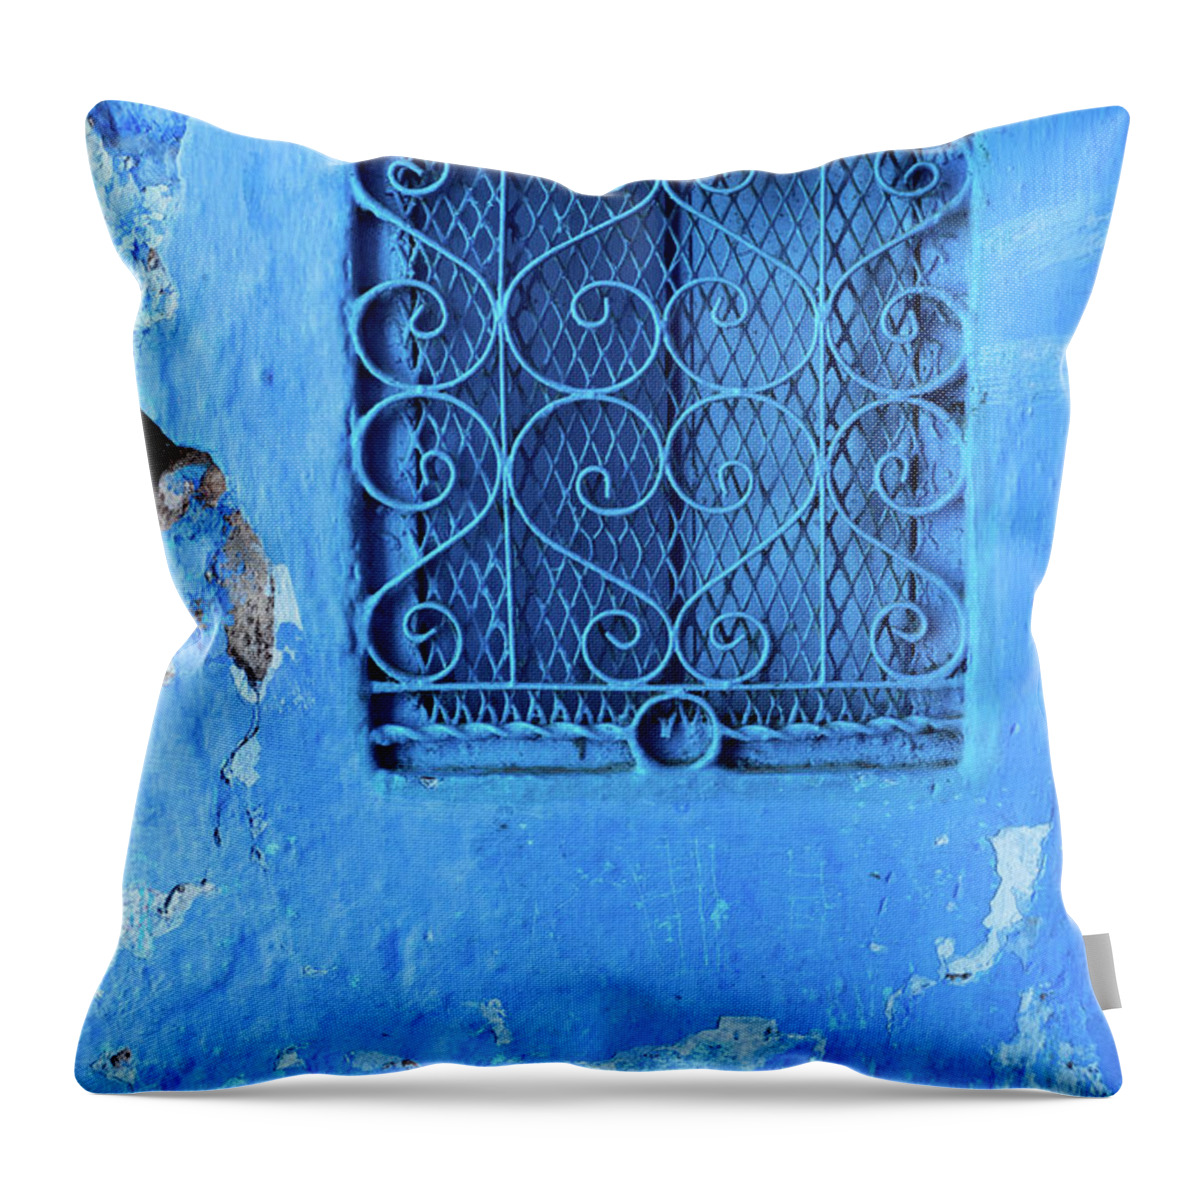 Chefchaouen Throw Pillow featuring the photograph Chefchaouen Window Grille 02 by Rick Piper Photography